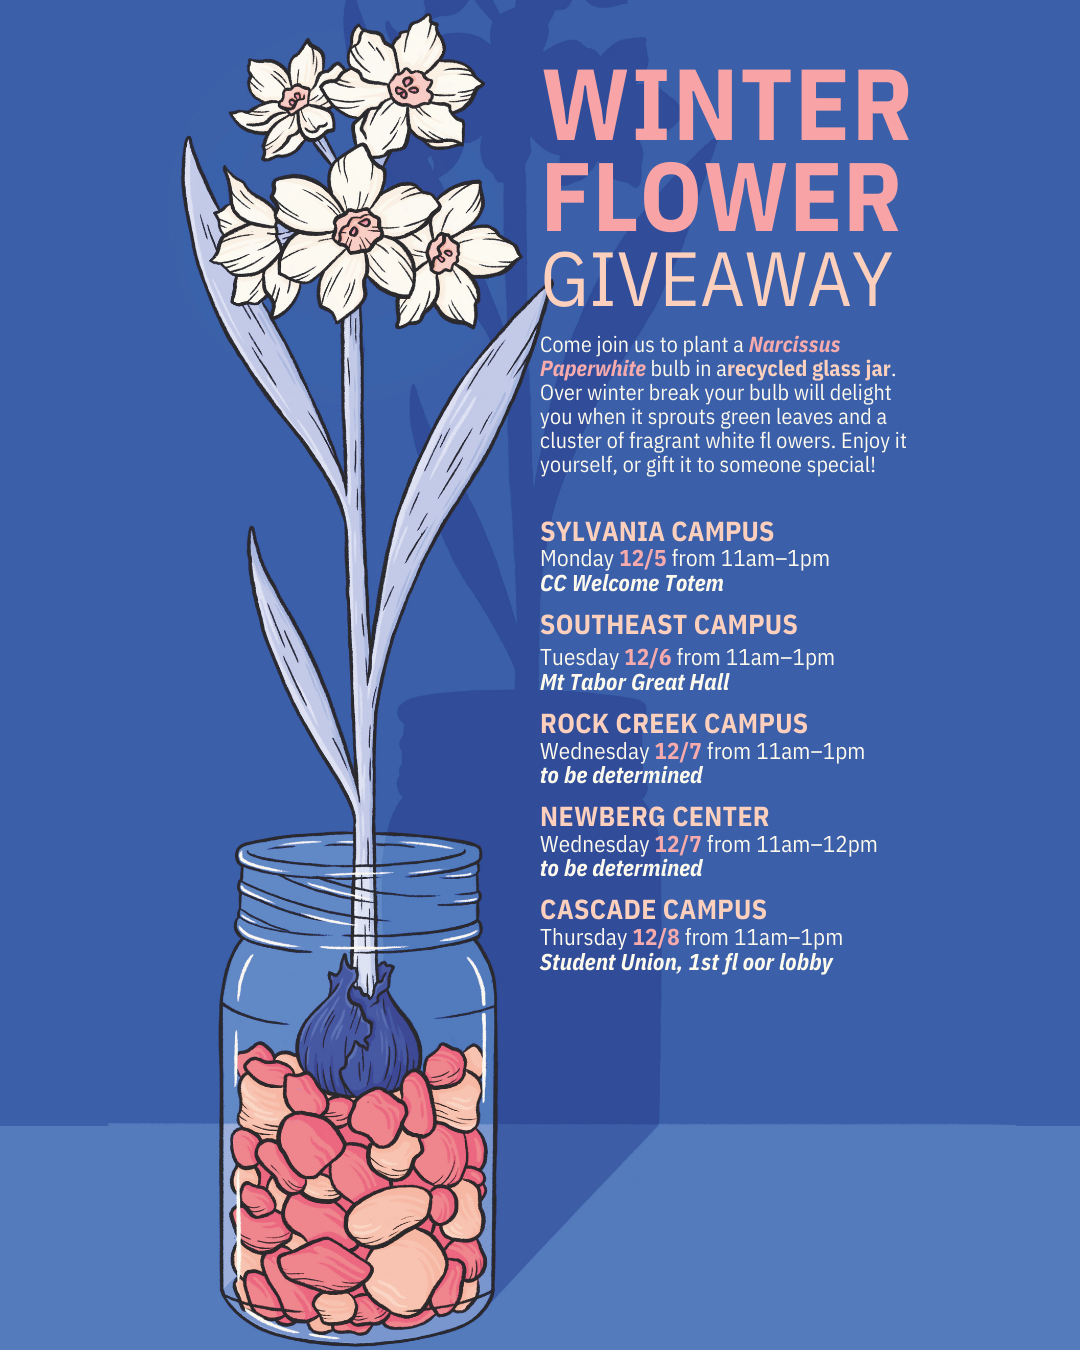 Winter Flower Giveaway Poster - Come join us to plant a Narcissus Paperwhite bulb in a recycled glass jar. Over winter break your bulb will delight you when it sprouts green leaves and a cluster of fragrant white ﬂowers. Enjoy it yourself, or gift it to someone special! We will have jars available, but please bring you own if you have one. You can bring a cleaned pasta jar, salsa jar, canning jar, etc. Monday, December 5th 11am-1pm at Sylvania CC Welcome Totem Tuesday, December 6th 11am-1pm at Southeast Campus Mt Tabor Hall Wednesday, December 7th 11am-1pm at Rock Creek, room TBD Wednesday, December 7th 11am-1pm at Newberg Center, room TBD Thursday, December 8th 11am-1pm at Cascade Campus Student Union